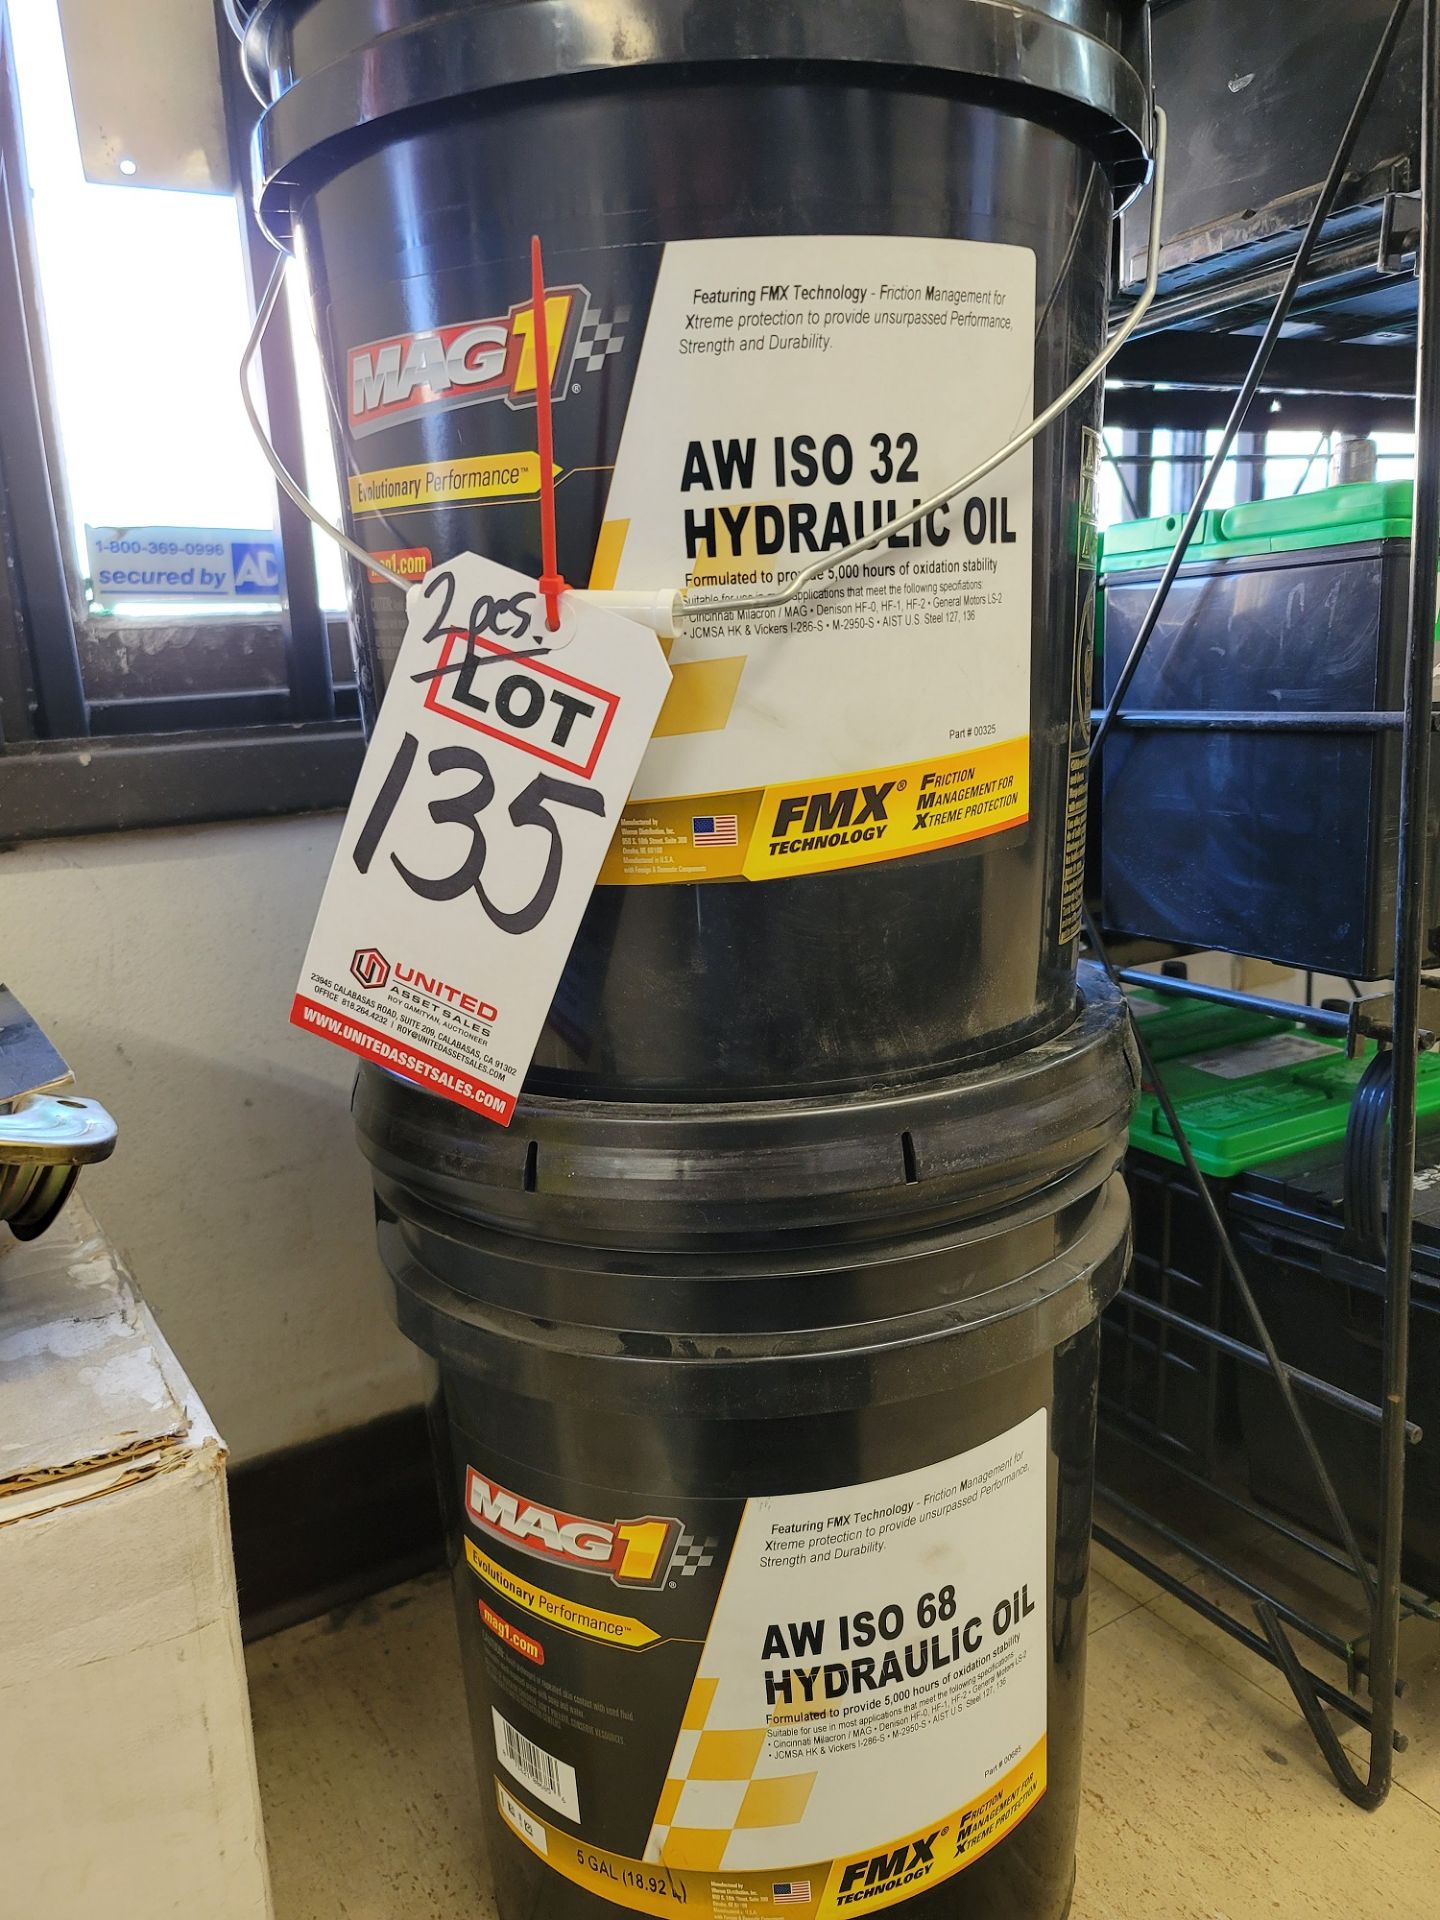 LOT - (2) 5-GALLON BUCKETS OF FMX TECHNOLOGY MAG1 AW ISO 32 HYDRAULIC OIL